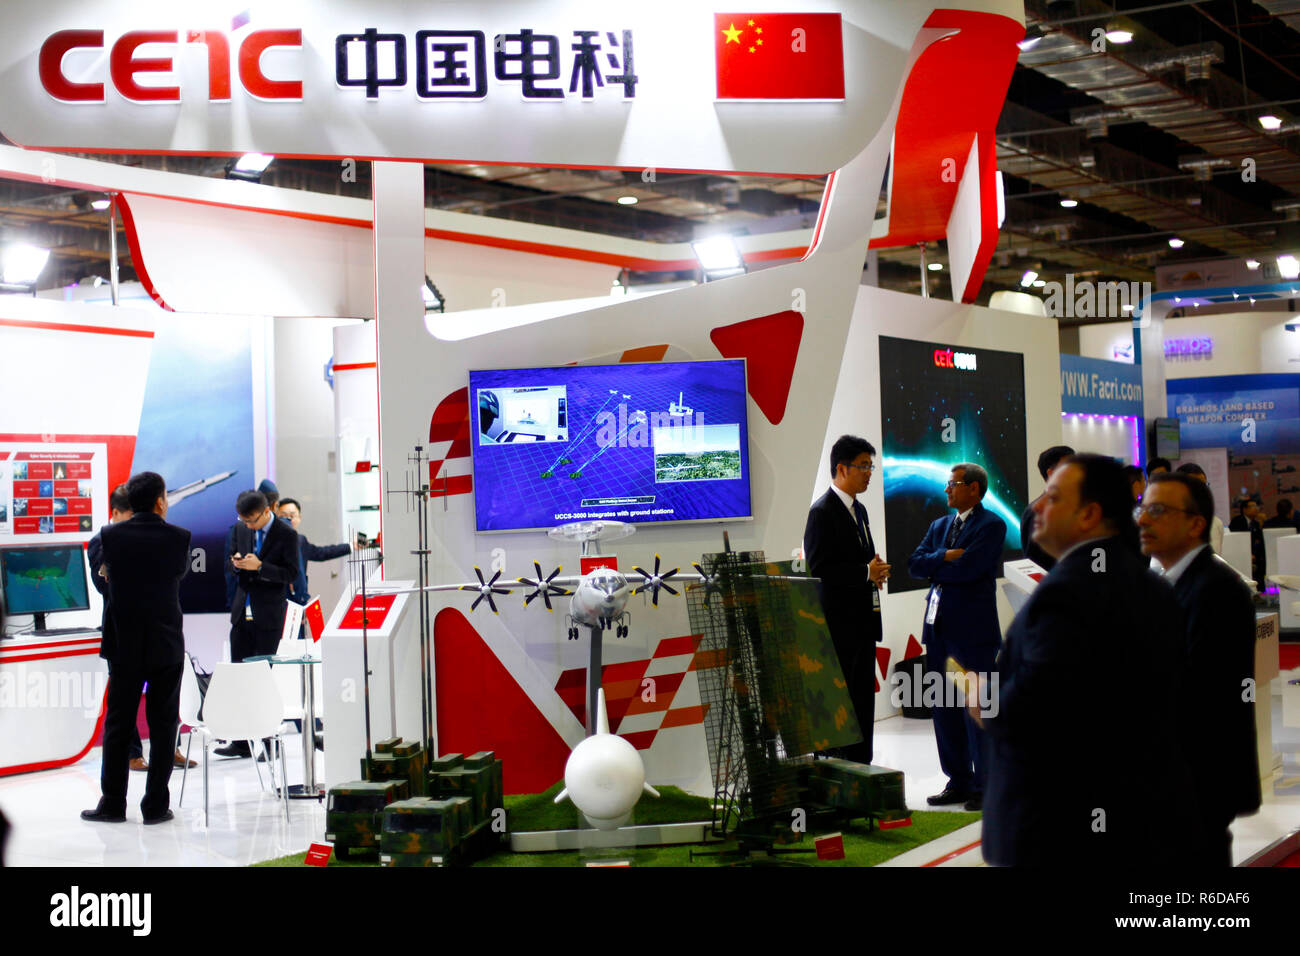 Cairo. 4th Dec, 2018. Photo taken on Dec. 4, 2018 shows the pavilion of China Electronics Technology Group Corporation (CETC) at Egypt Defence Expo (EDEX) 2018 in Cairo, Egypt. Chinese defense products have demonstrated strong presence in their pavilions at Egypt's first tri-service defense expo, EDEX 2018, held on Dec. 3-5 in the Cairo International Convention and Exhibition Center. Credit: Ahmed Gomaa/Xinhua/Alamy Live News Stock Photo